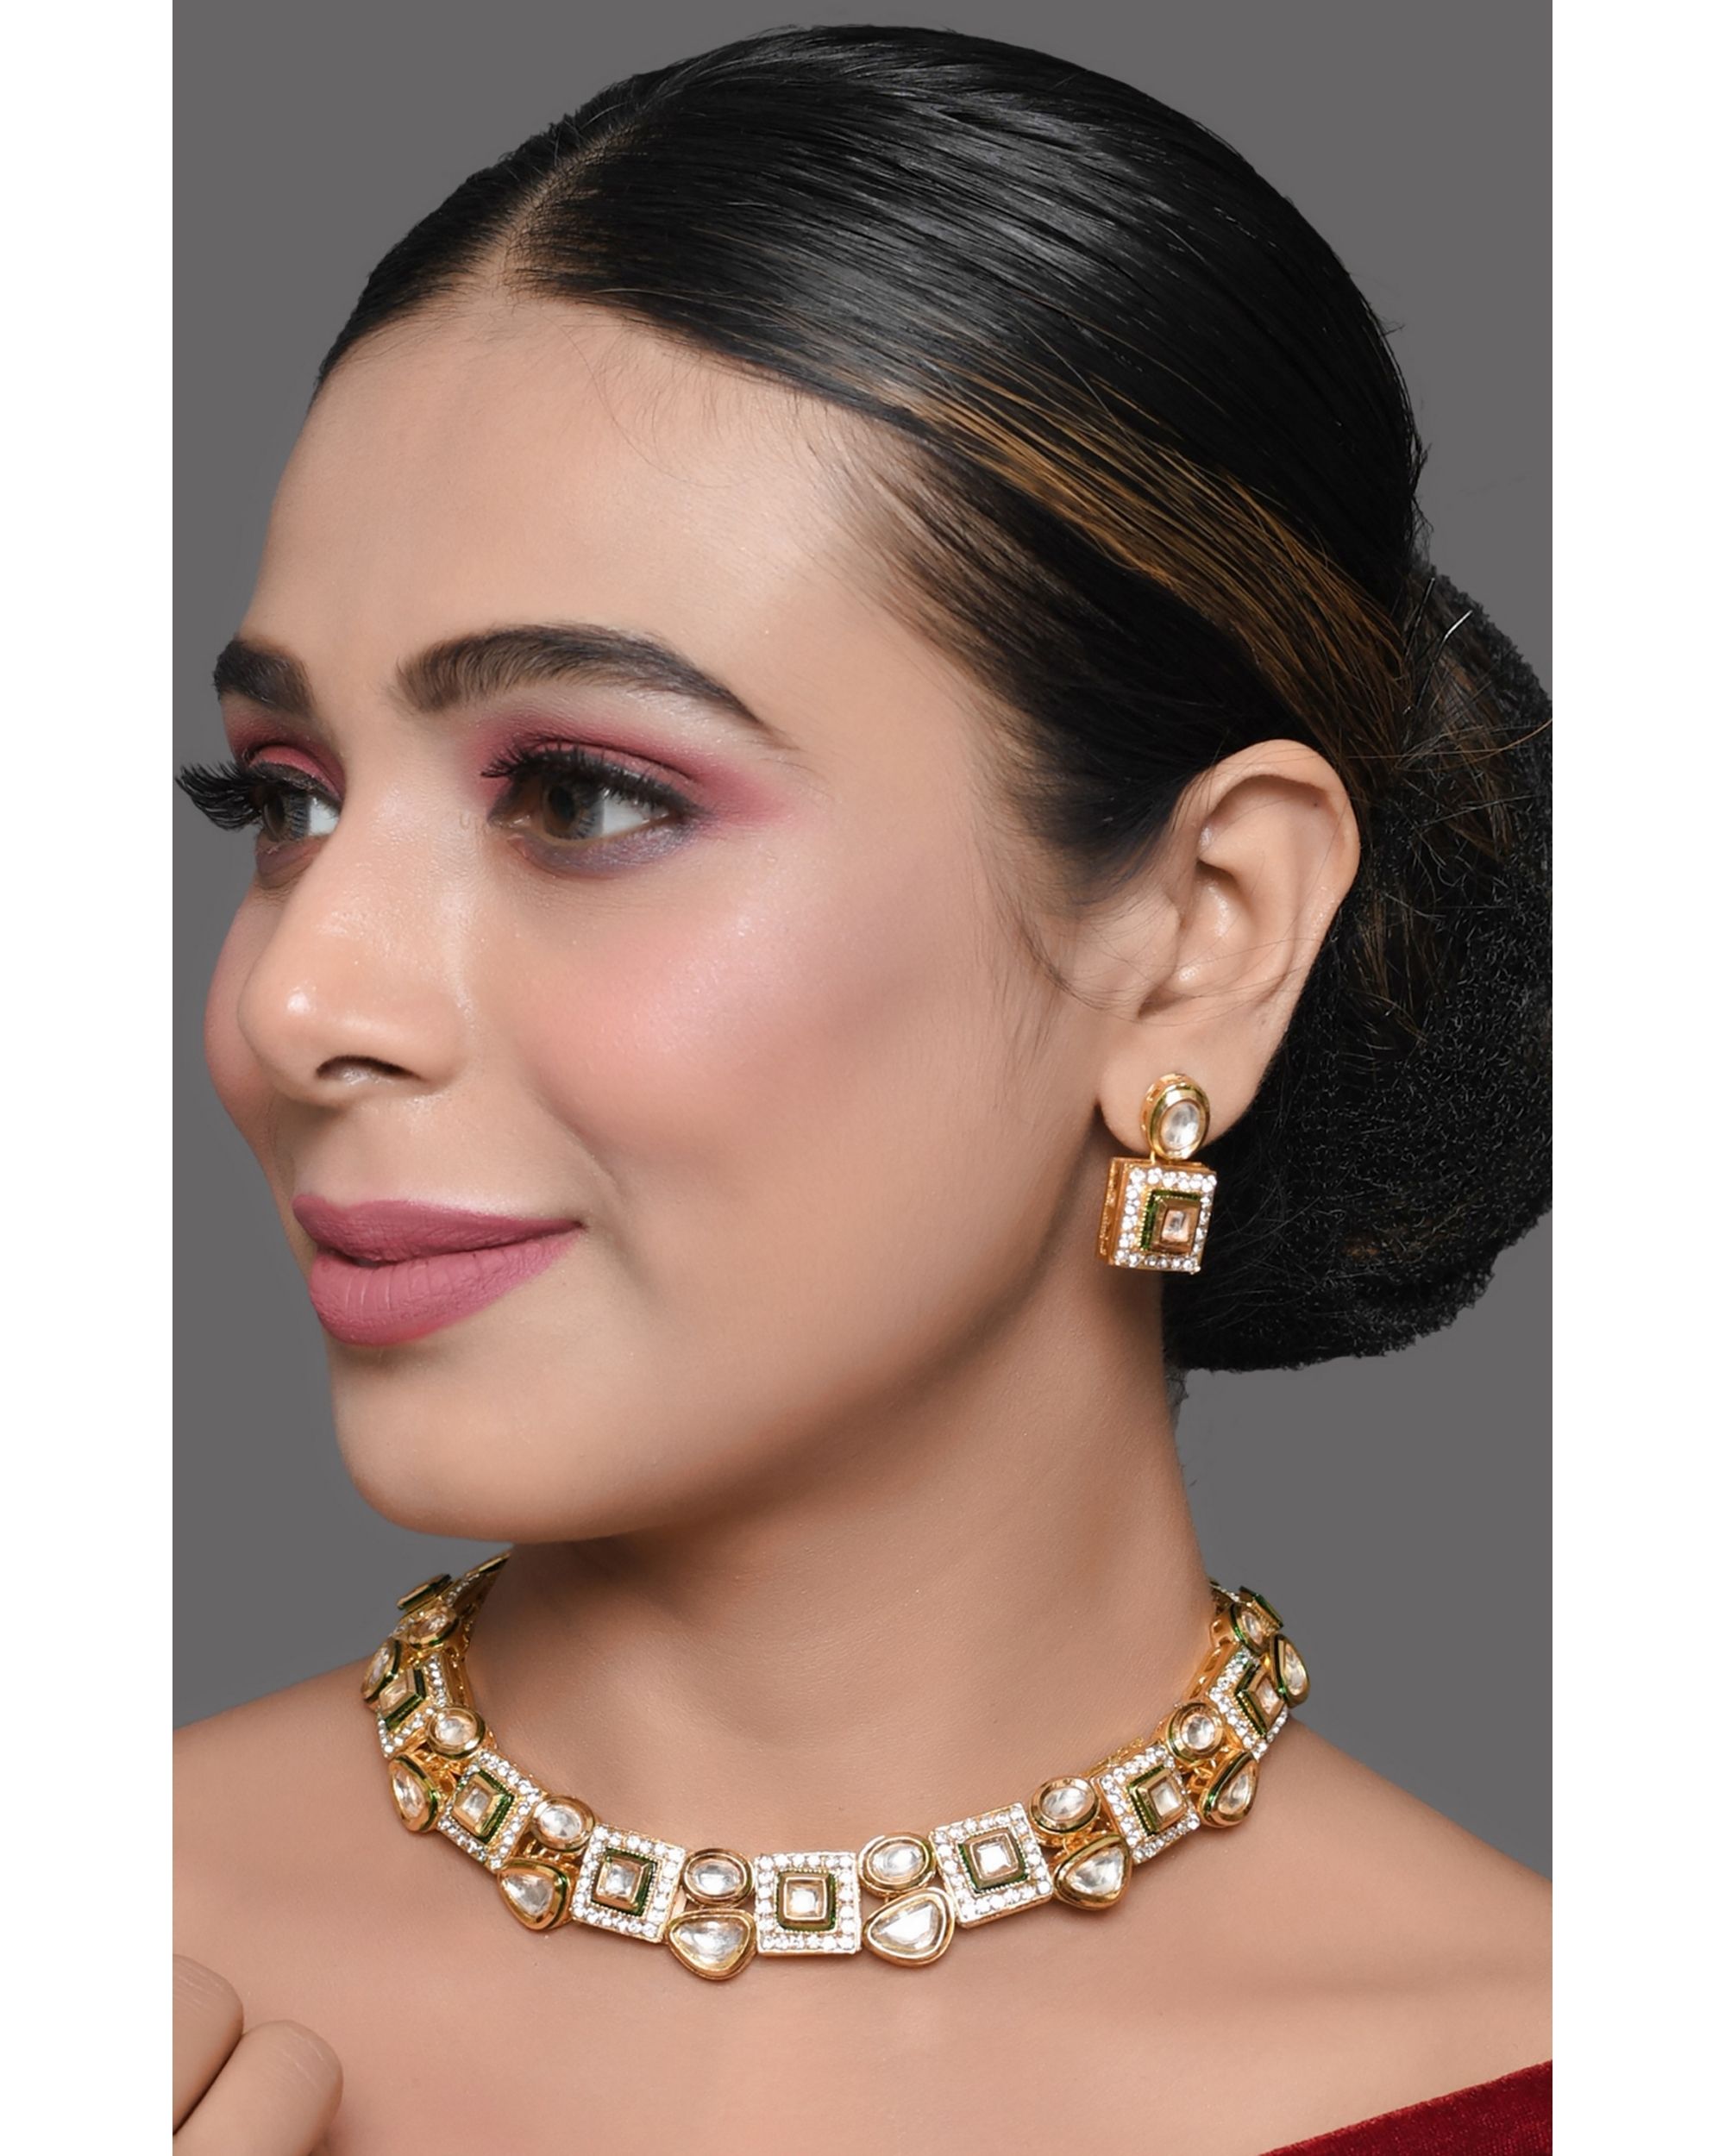 Hand crafted kundan neckpiece with earrings - set of two